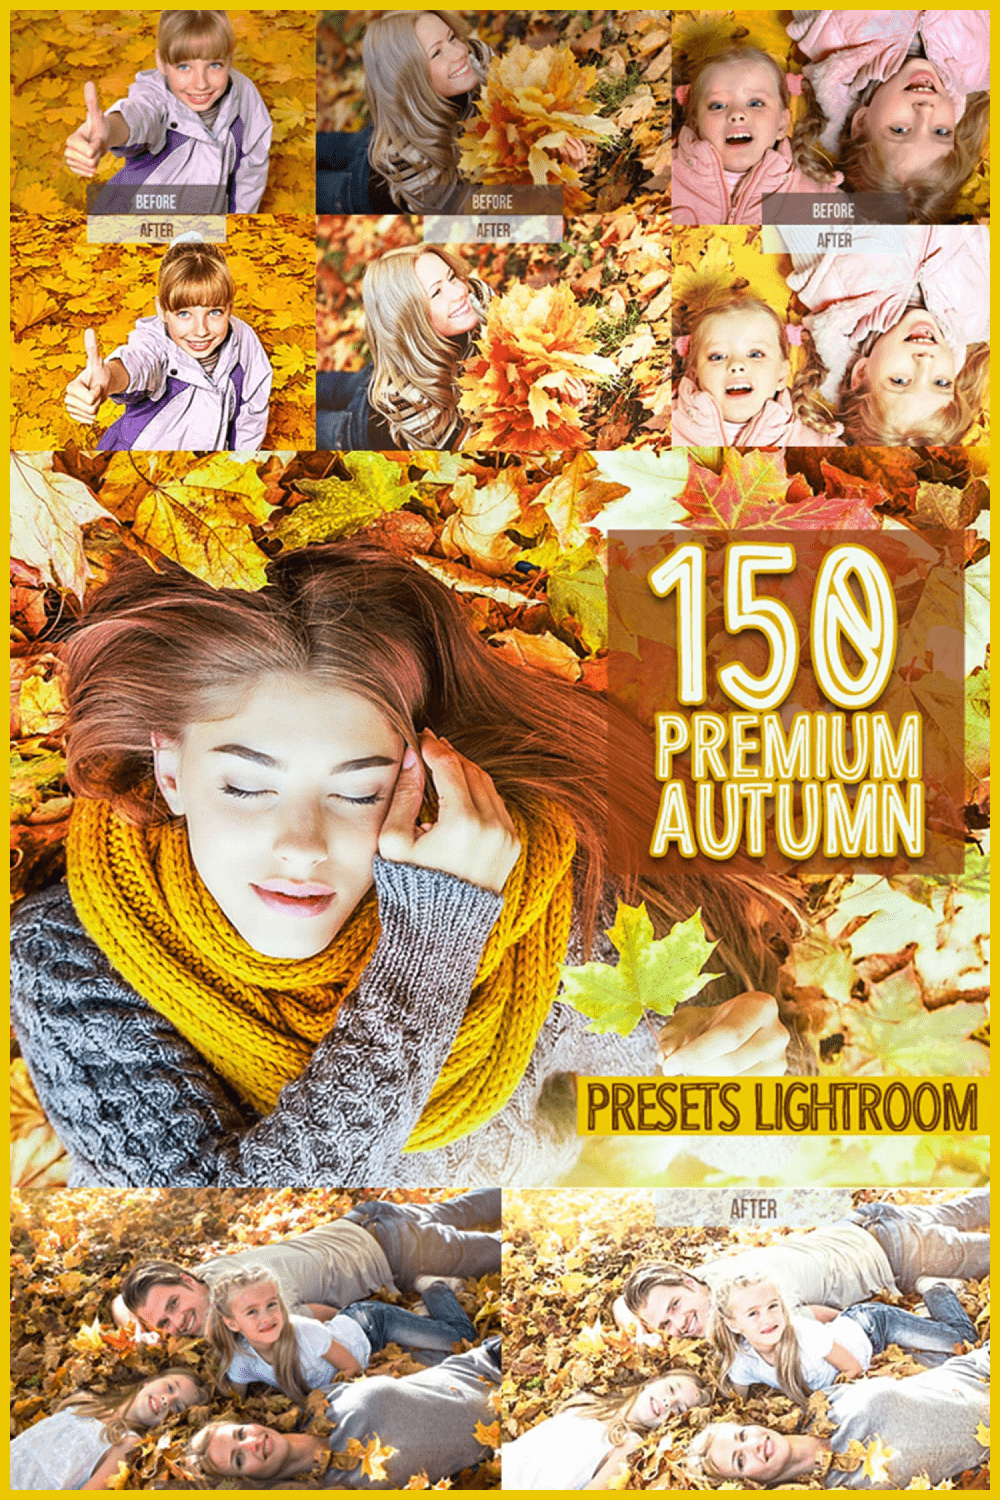 Autumn presets for your photo.